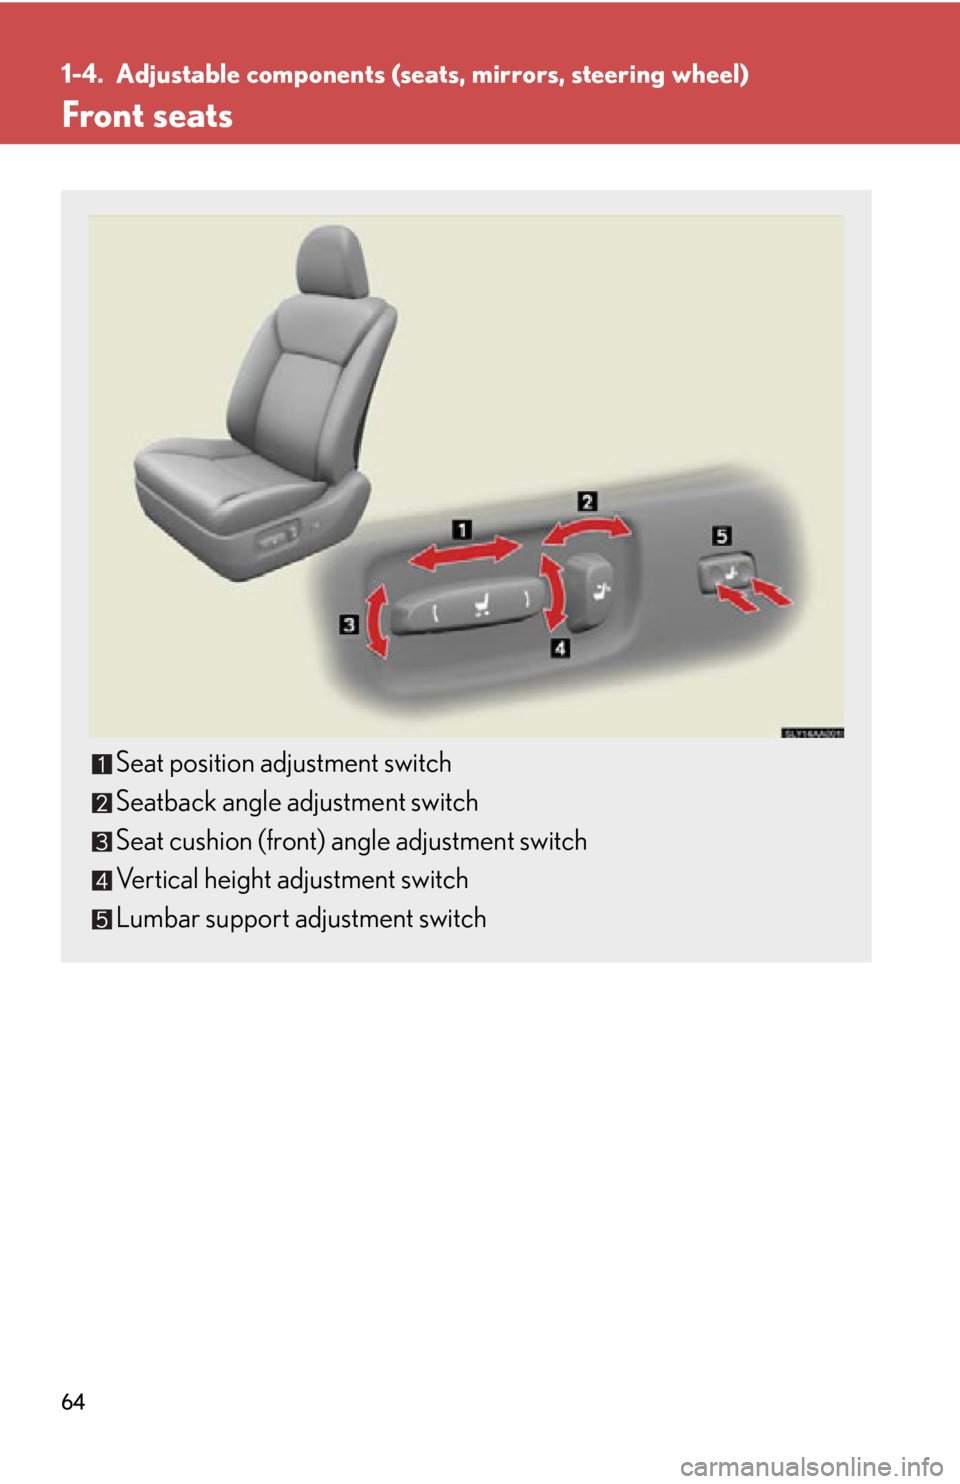 Lexus HS250h 2010  Hybrid system / LEXUS 2010 HS250H OWNERS MANUAL (OM75006U) 64
1-4. Adjustable components (seats, mirrors, steering wheel)
Front seats
Seat position adjustment switch
Seatback angle adjustment switch
Seat cushion (front) angle adjustment switch
Vertical height